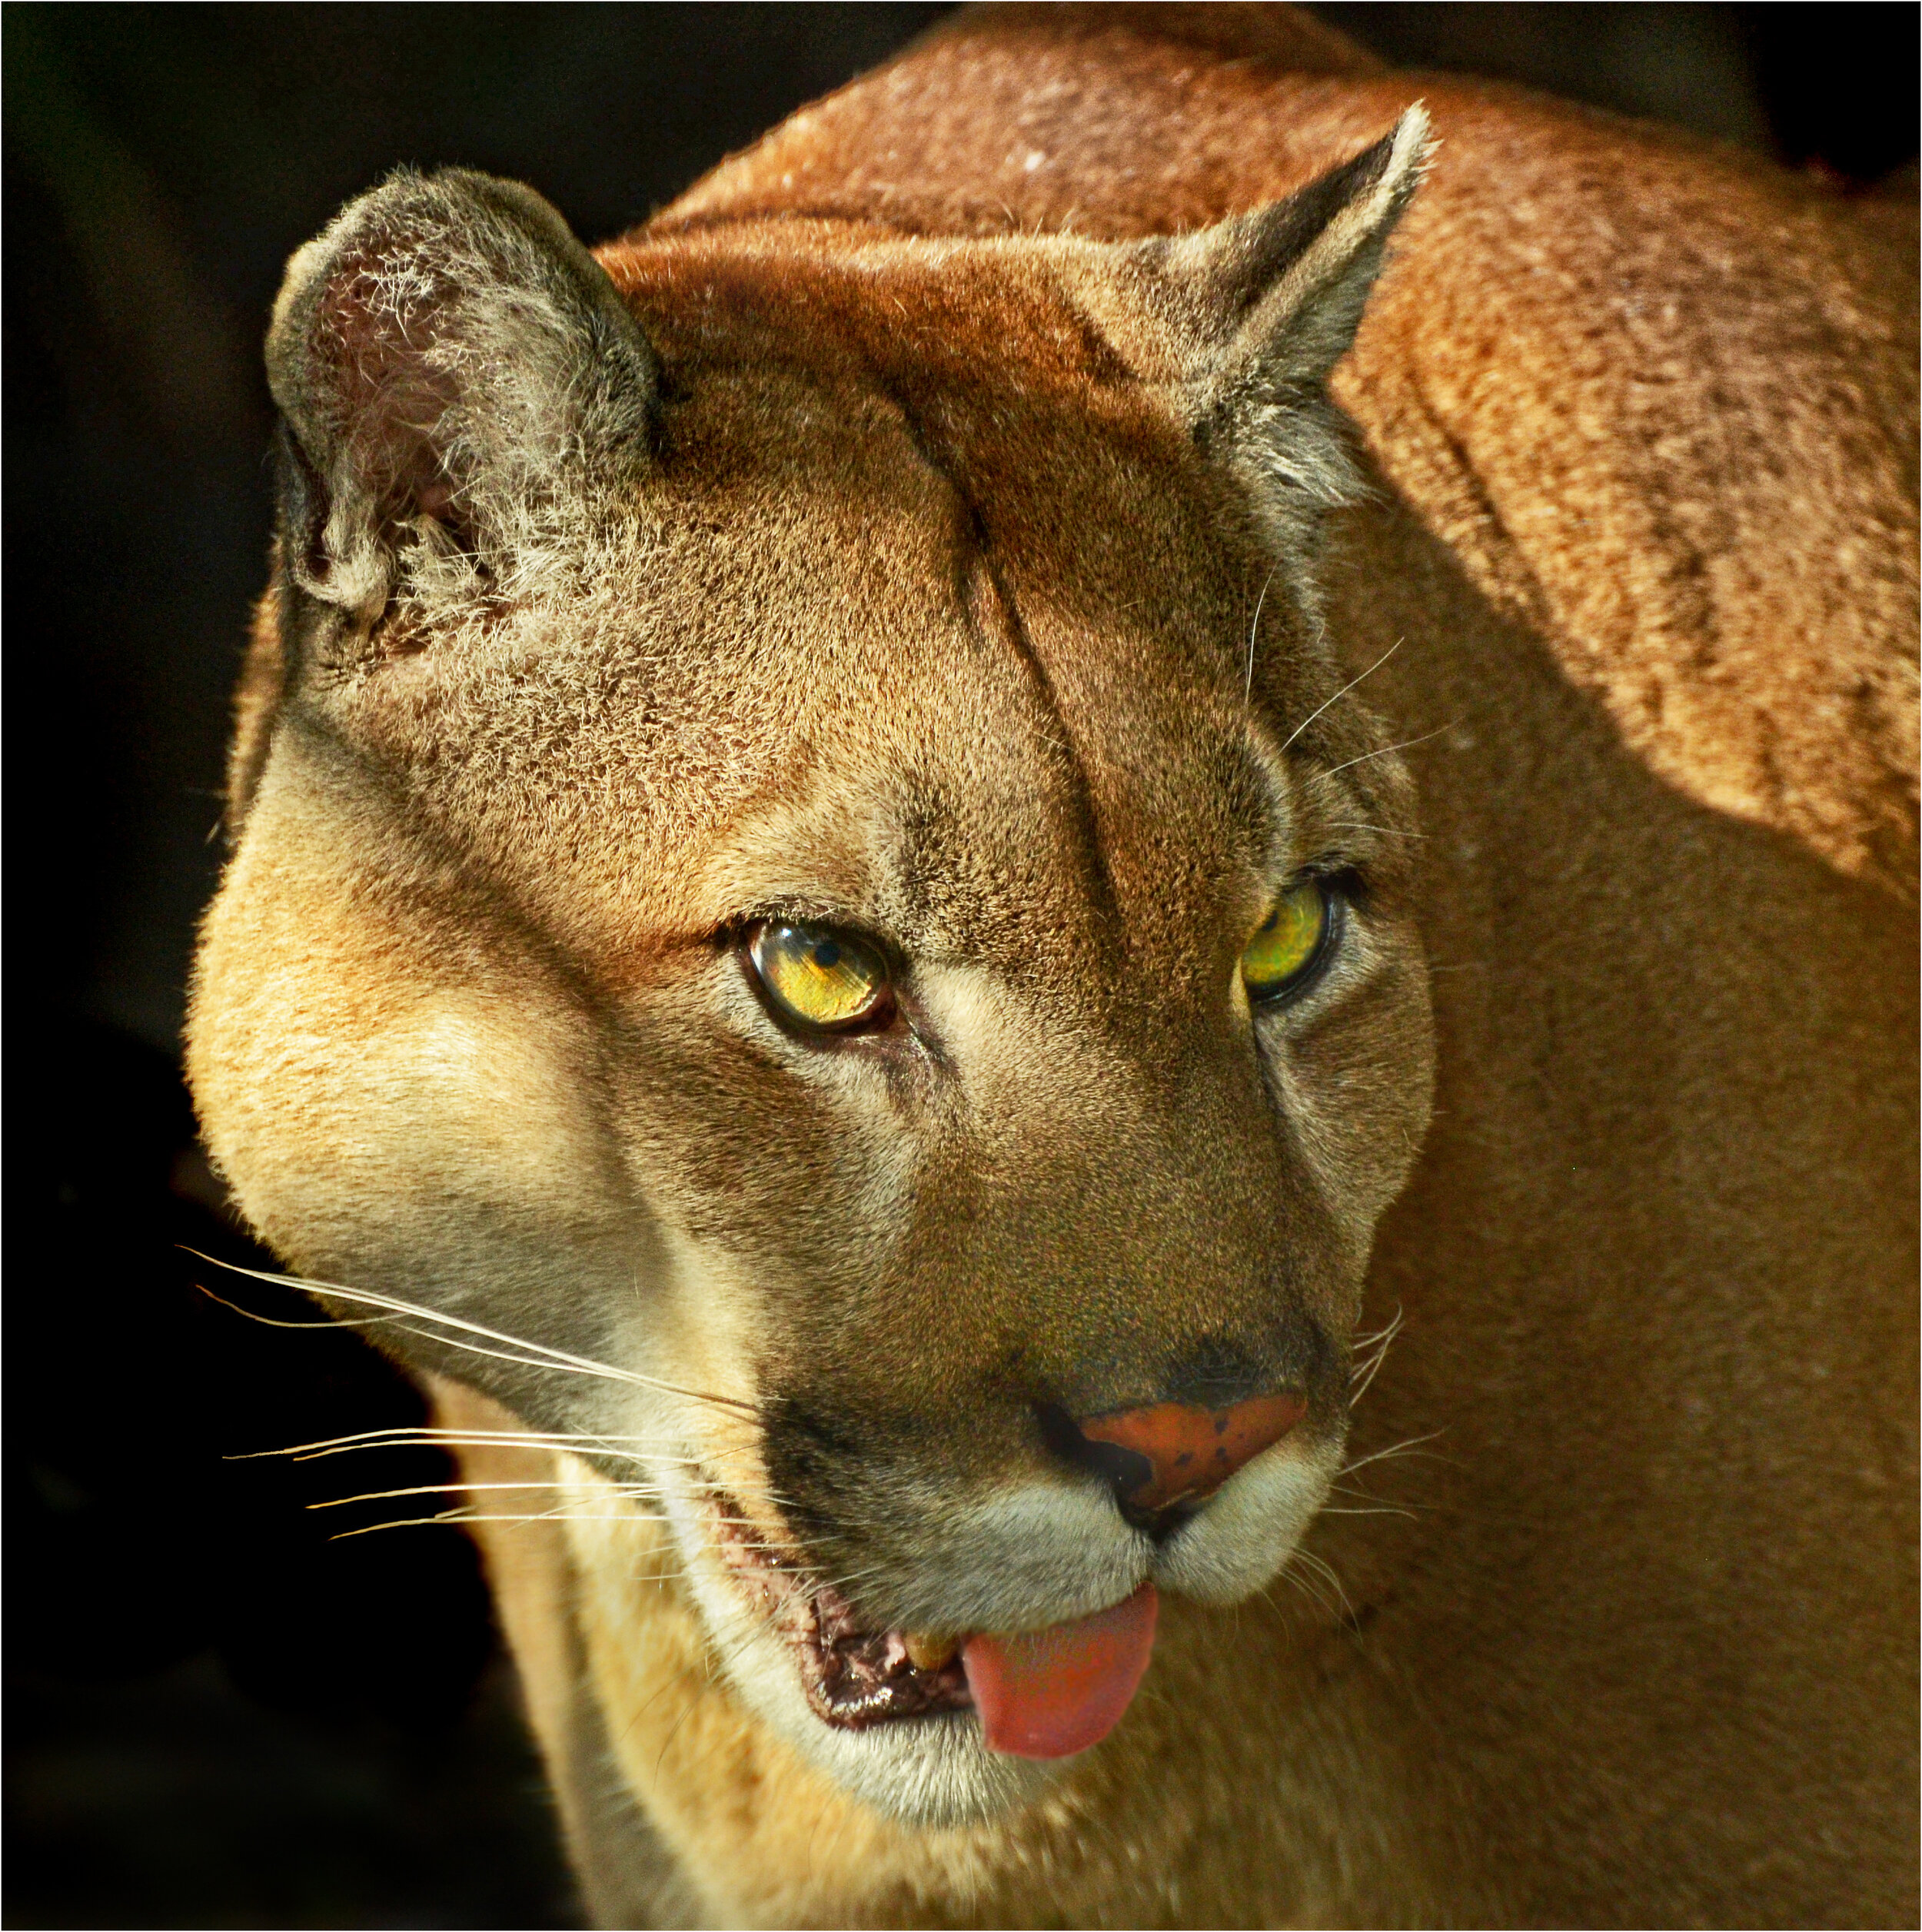 The Endangered Florida Panther. Photograph © 2021 Jerry Biddlecom. All Rights Reserved.